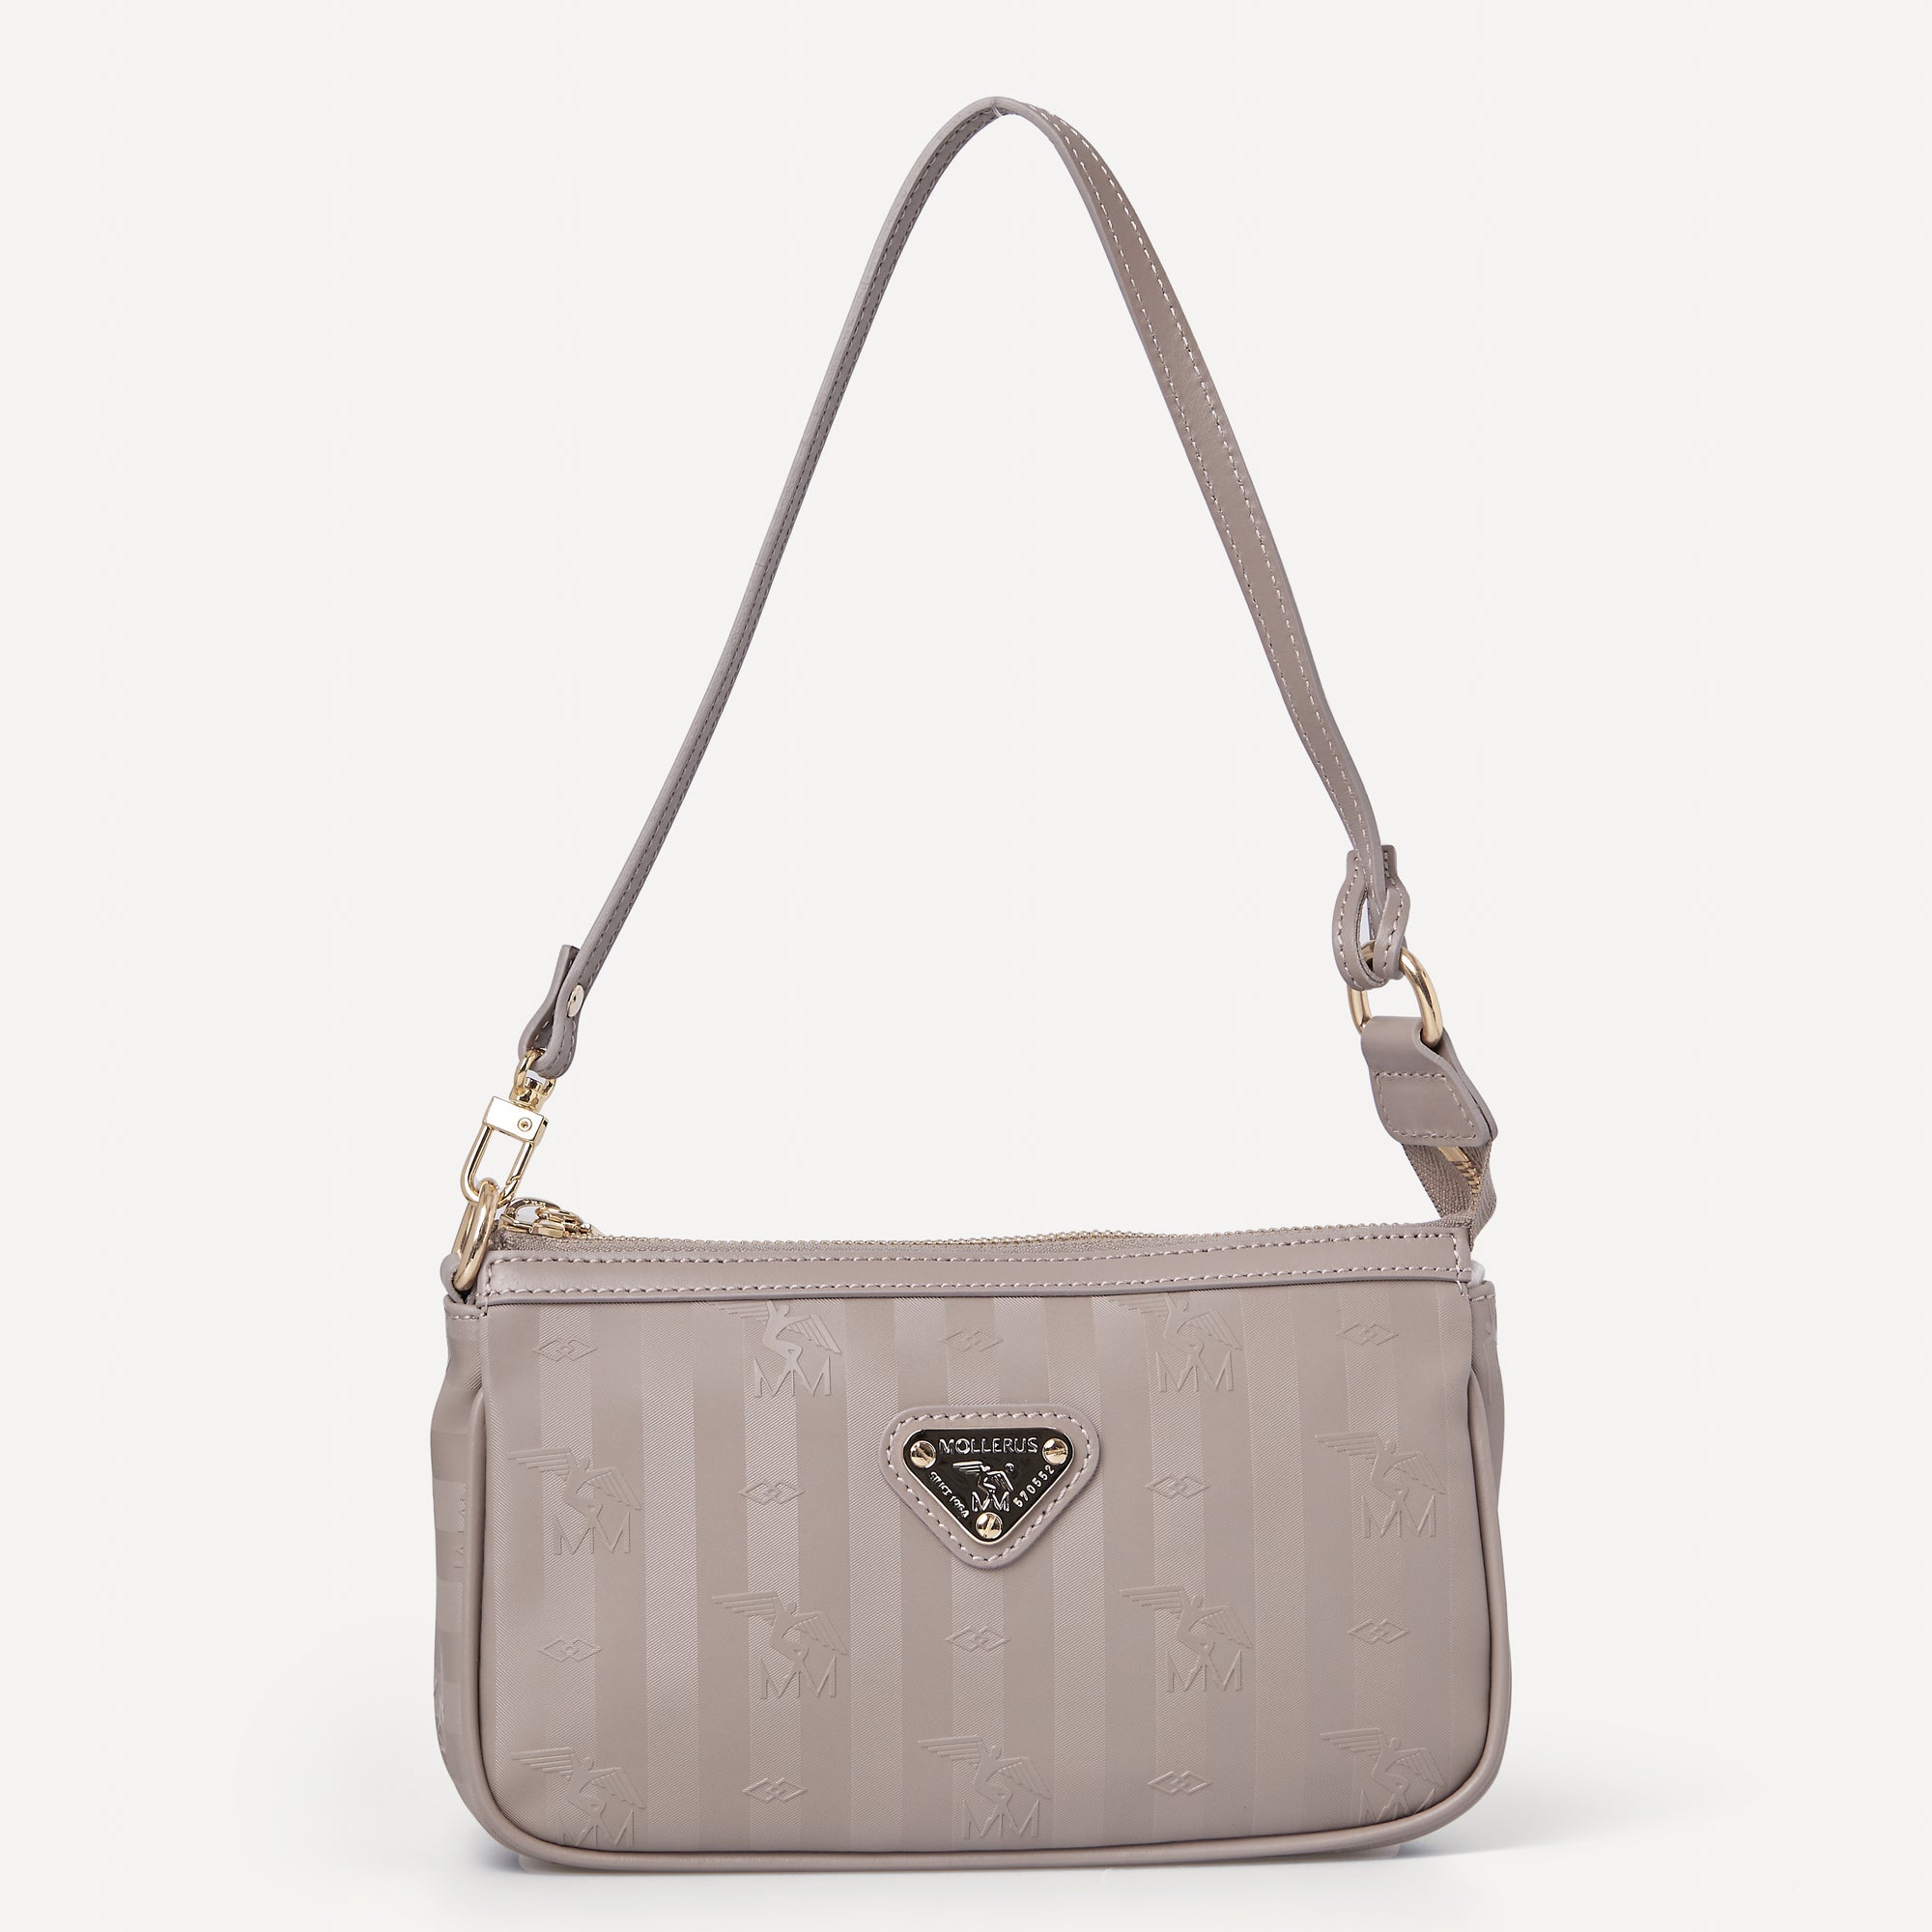 MISSY | Schultertasche taupe grau/gold - frontal